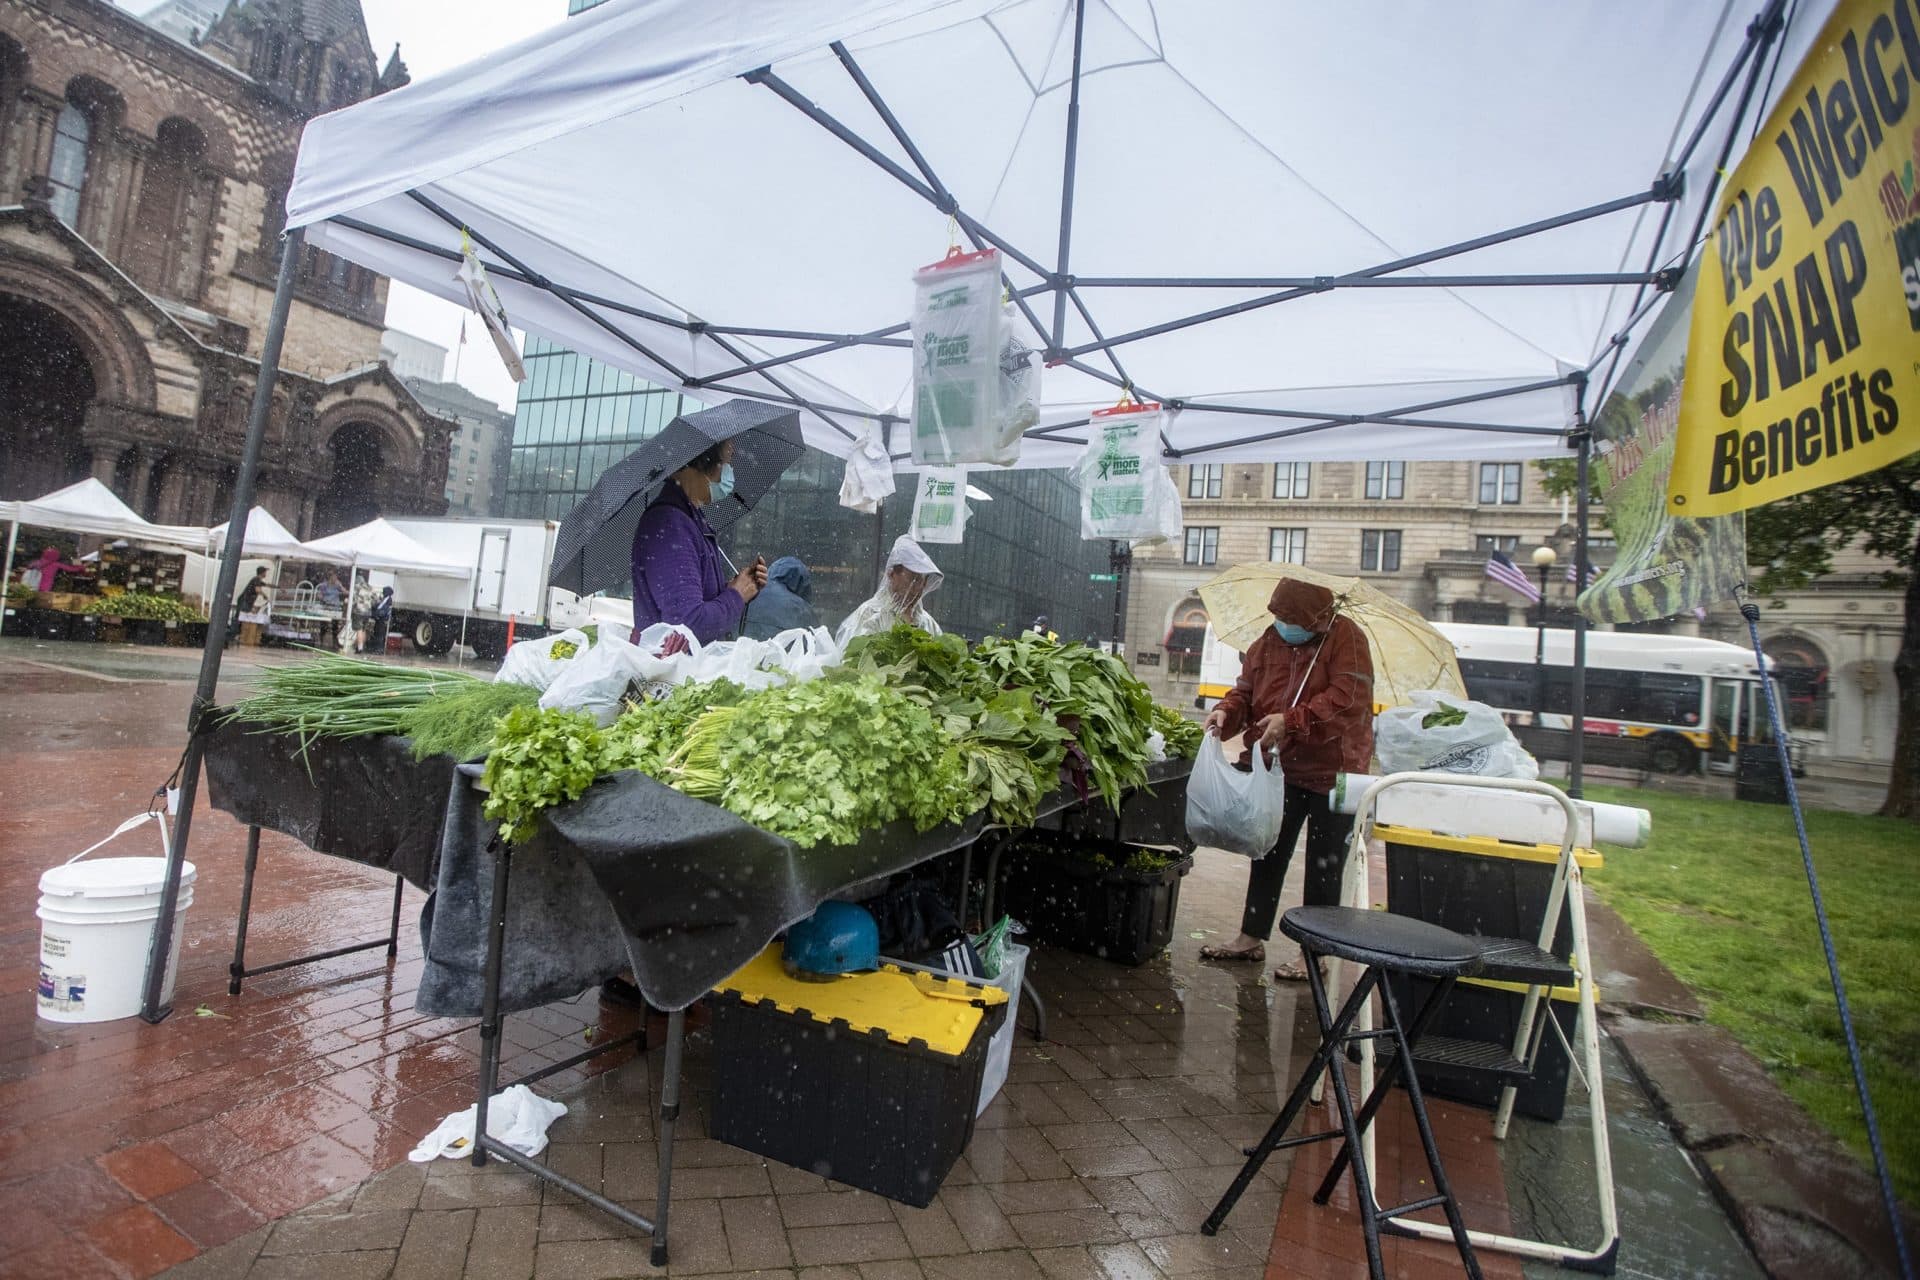 Only six out of the normal 25 vendors that operate at the Copley Square Farmer’s Market on Friday decided to brave weather during Tropical Storm Elsa. (Jesse Costa/WBUR)